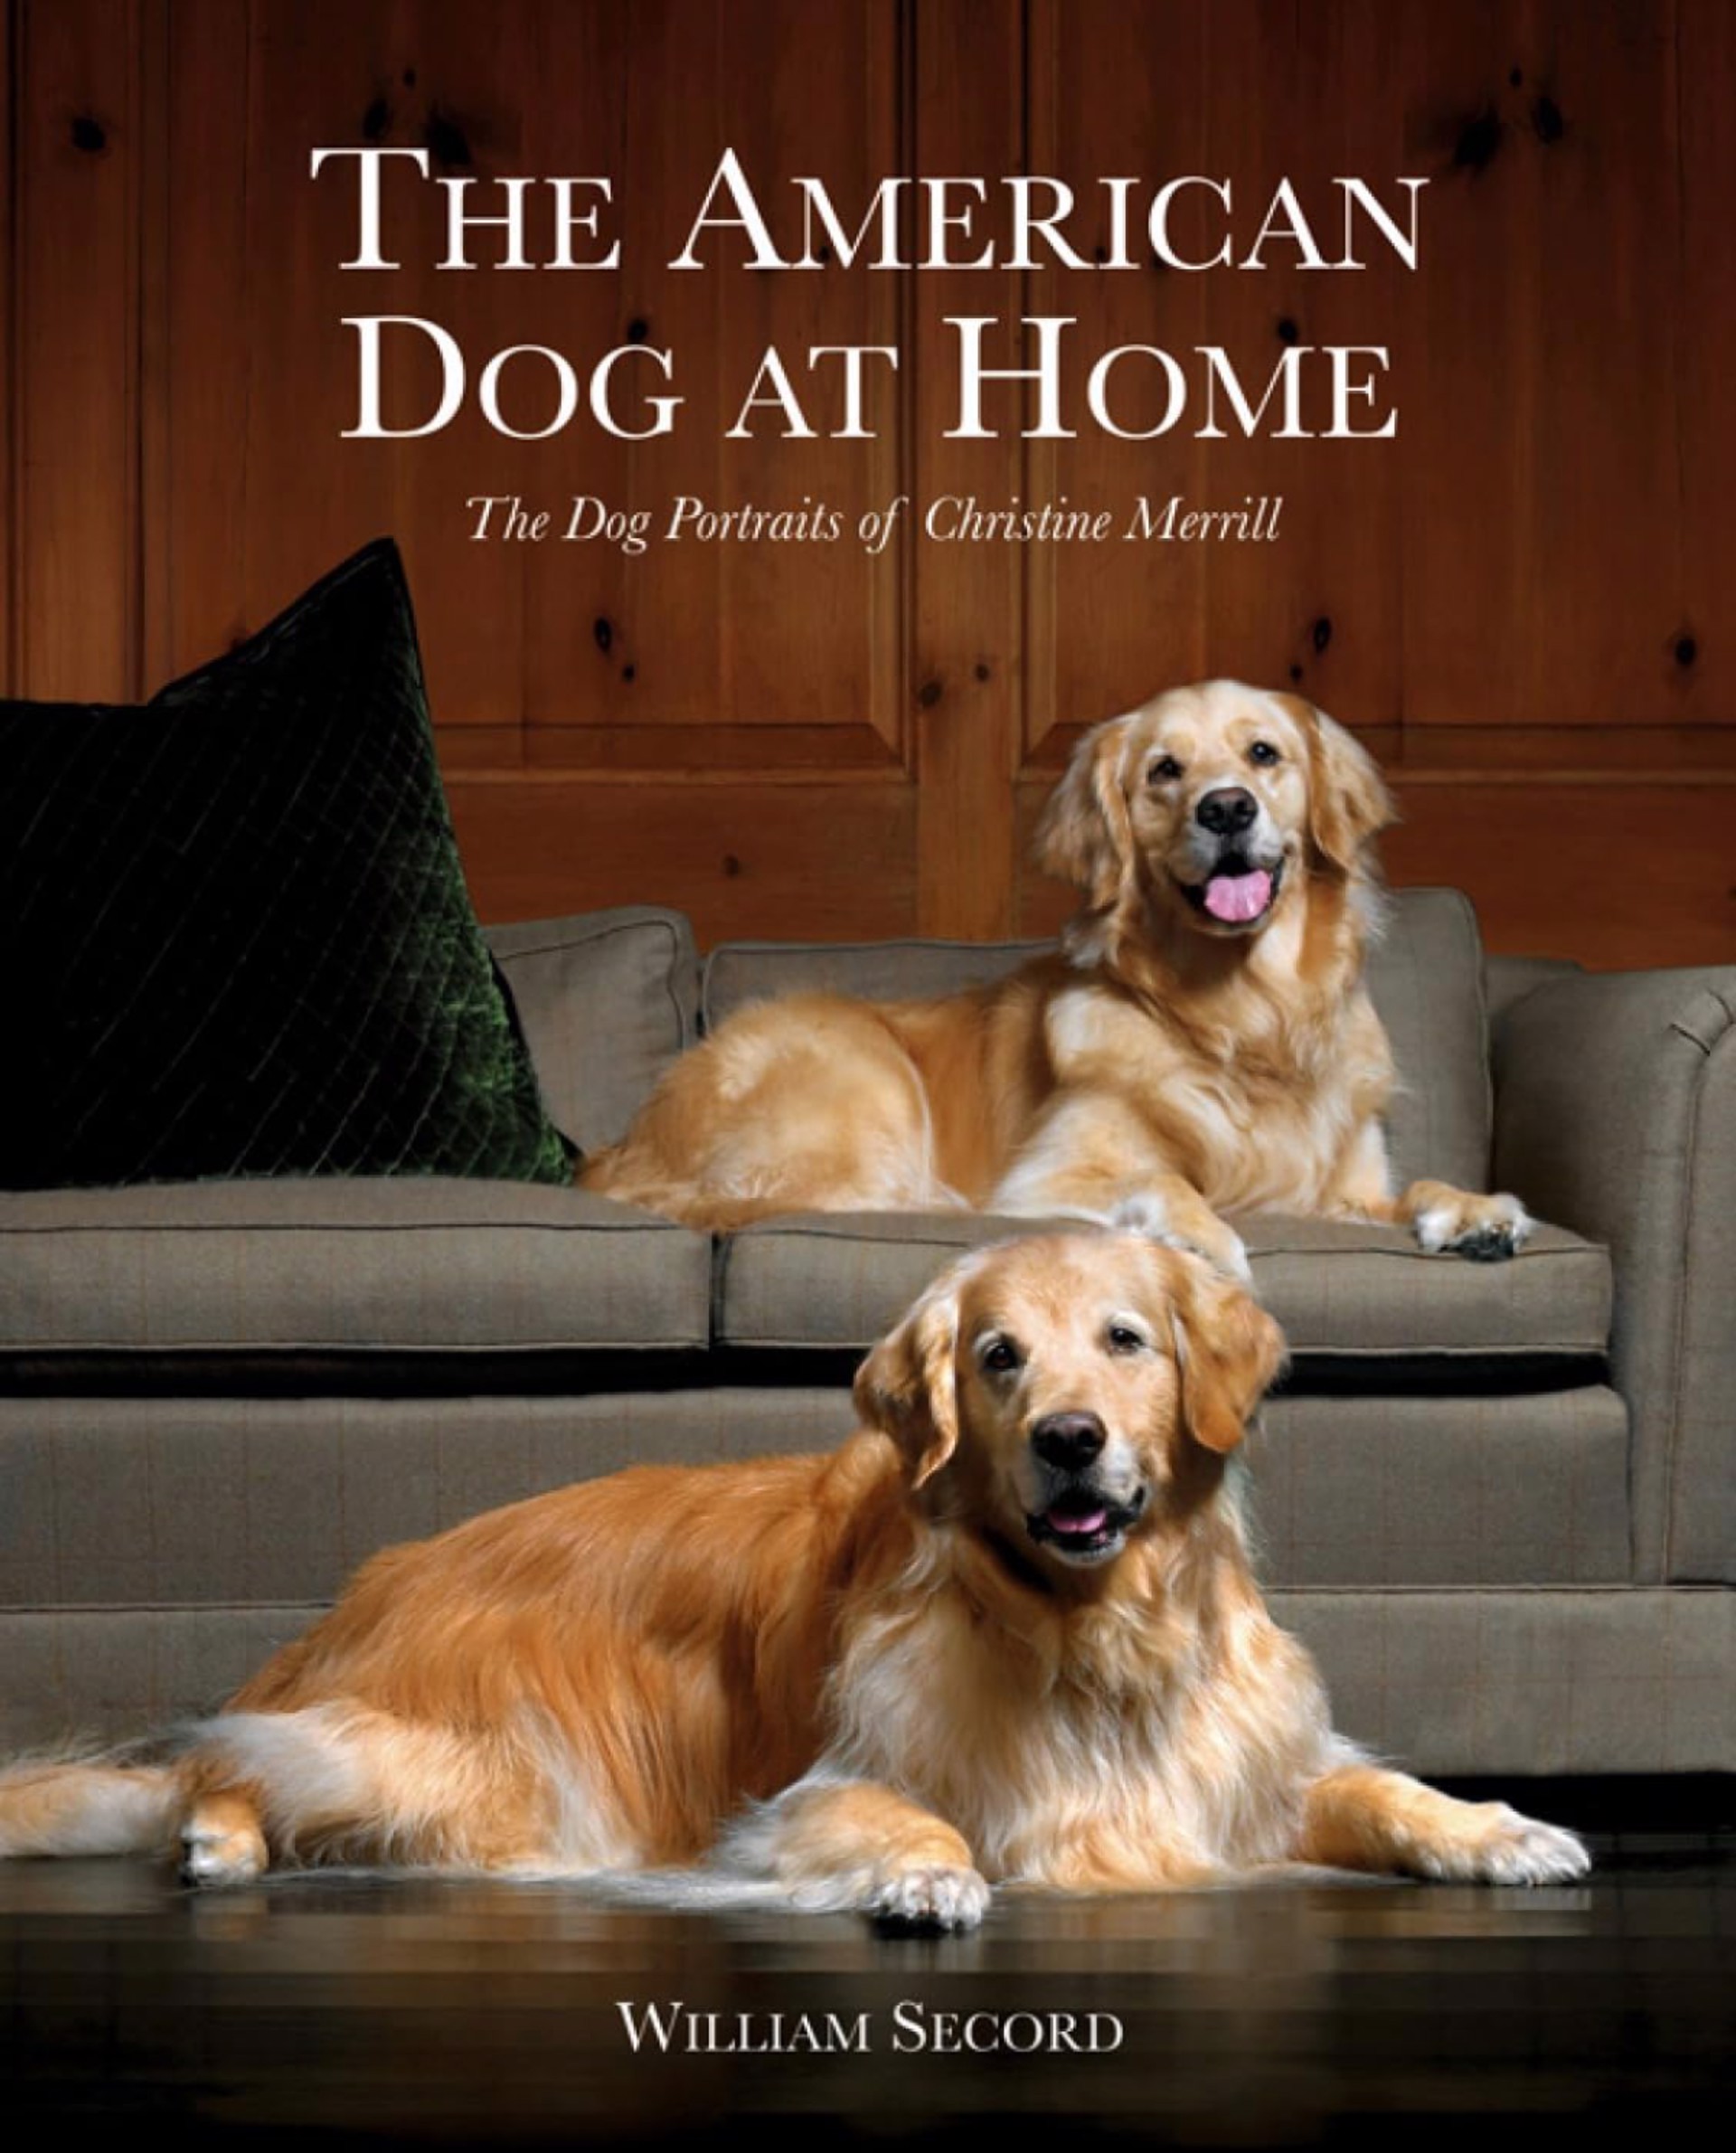 The American Dog At Home: The Dog Paintings of Christine Merrill by William Secord